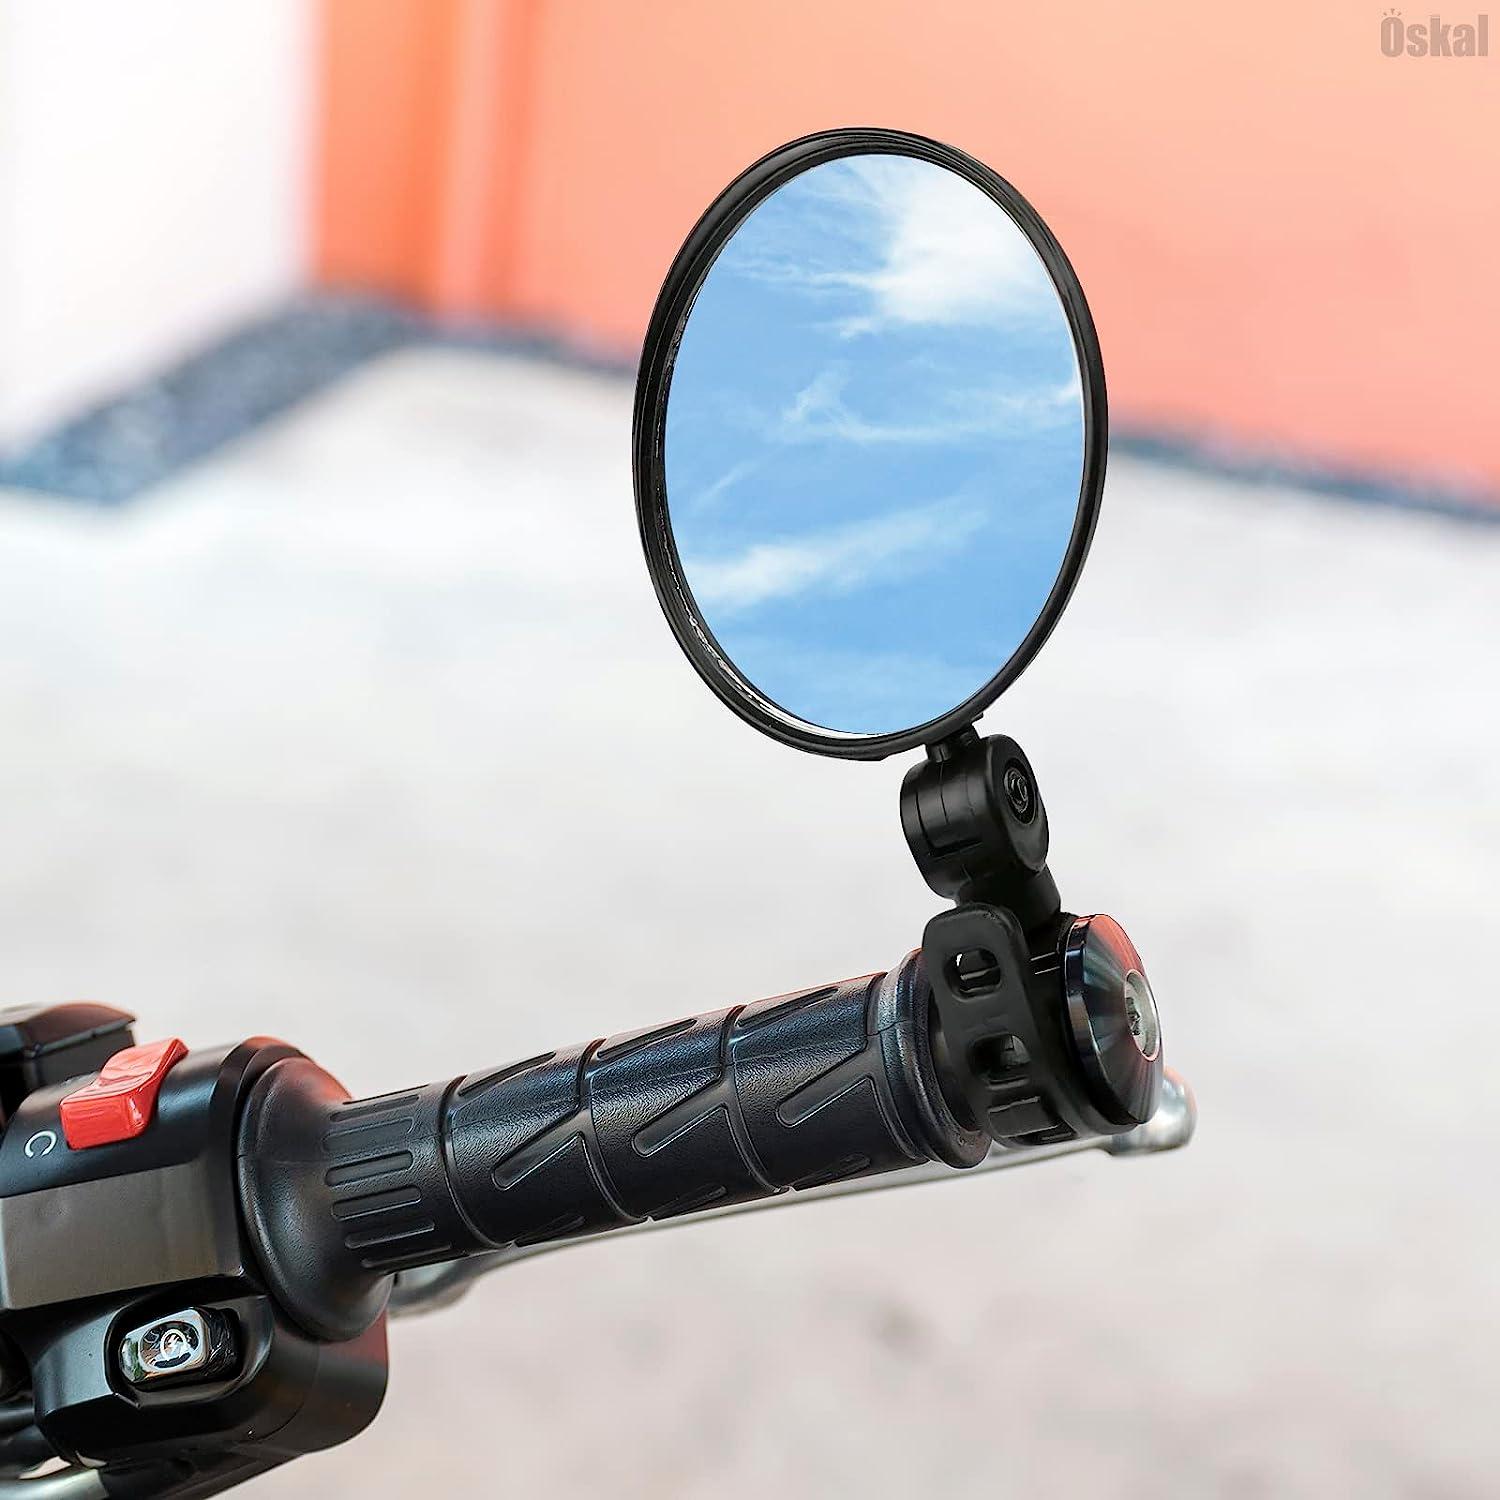 How to set rear view mirror in bike? 